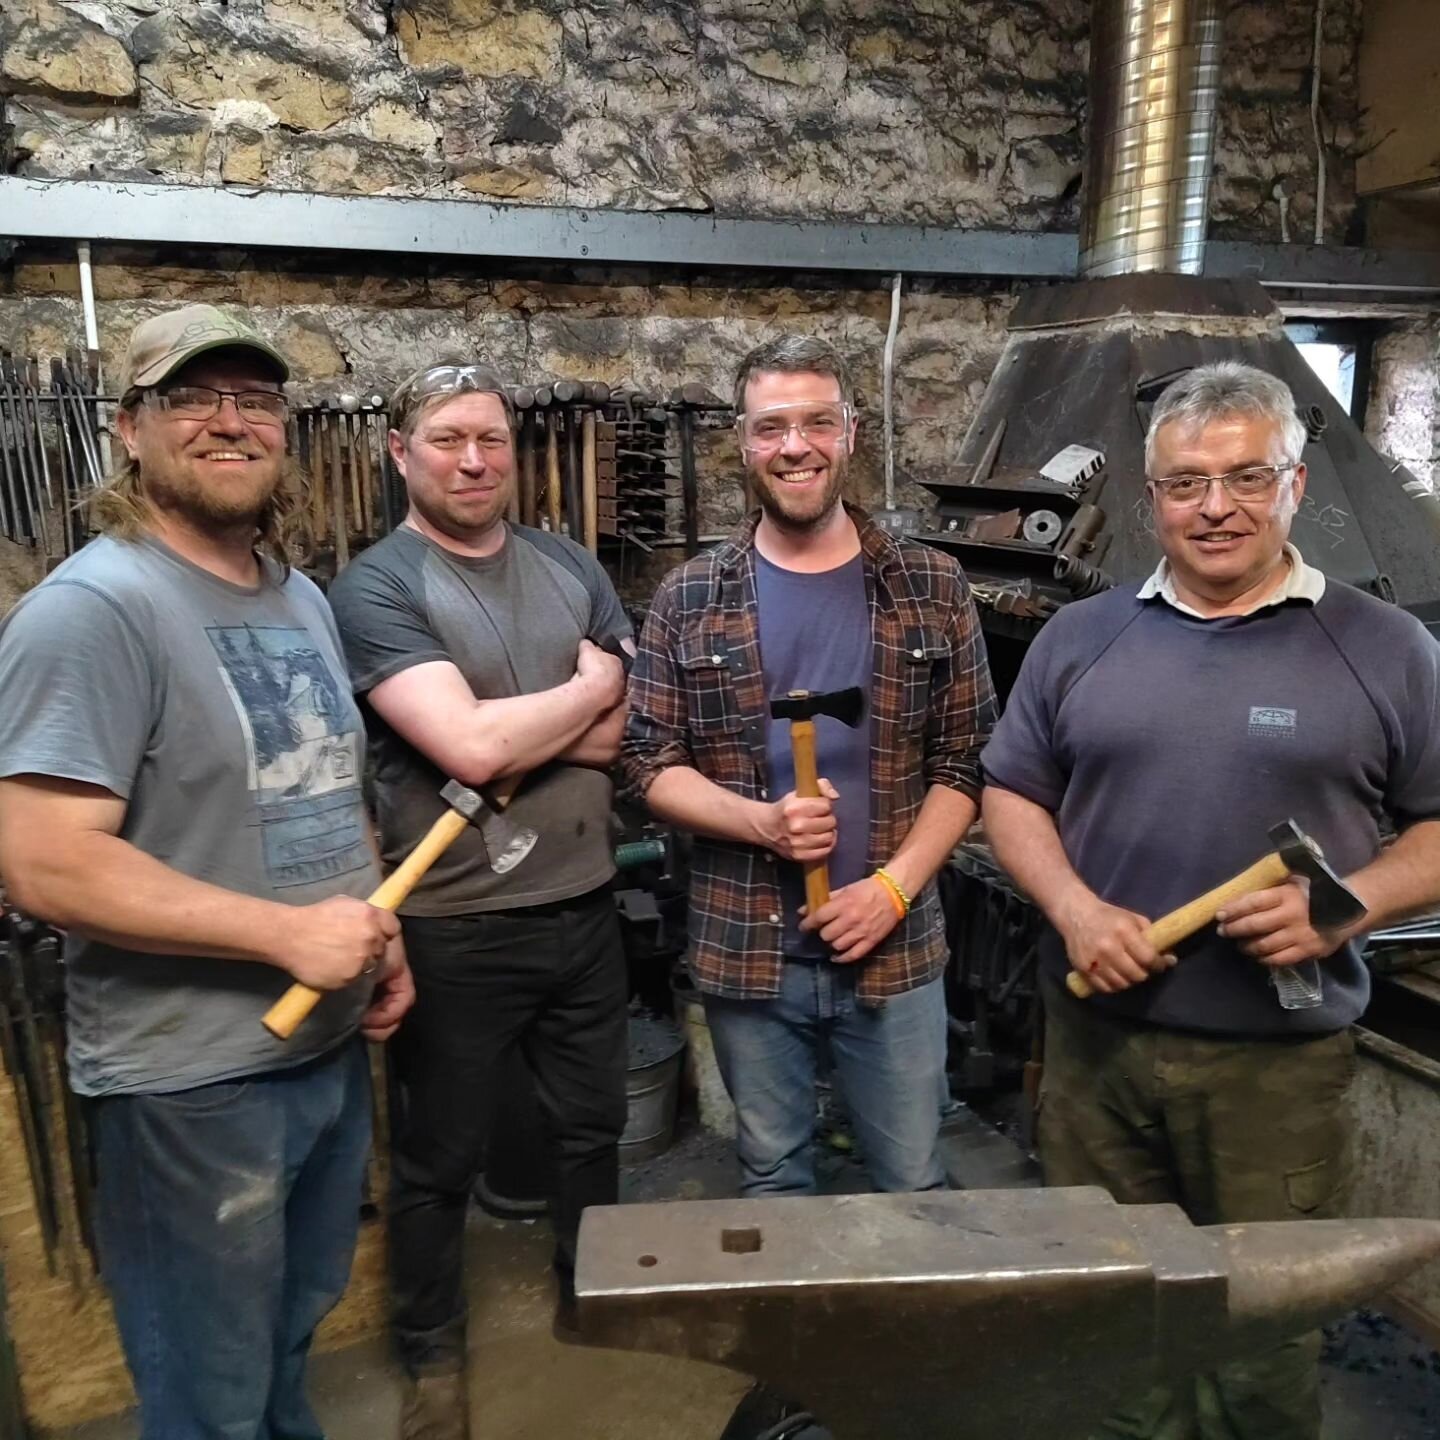 NEW COURSE DATES AVAILABLE!!!!!!!!

Dear friends of the forge, we have a selection of new course dates available for July, August and September.
Just head over to www.middlerowforge.com to find all the dates and info you need to book onto one of our 